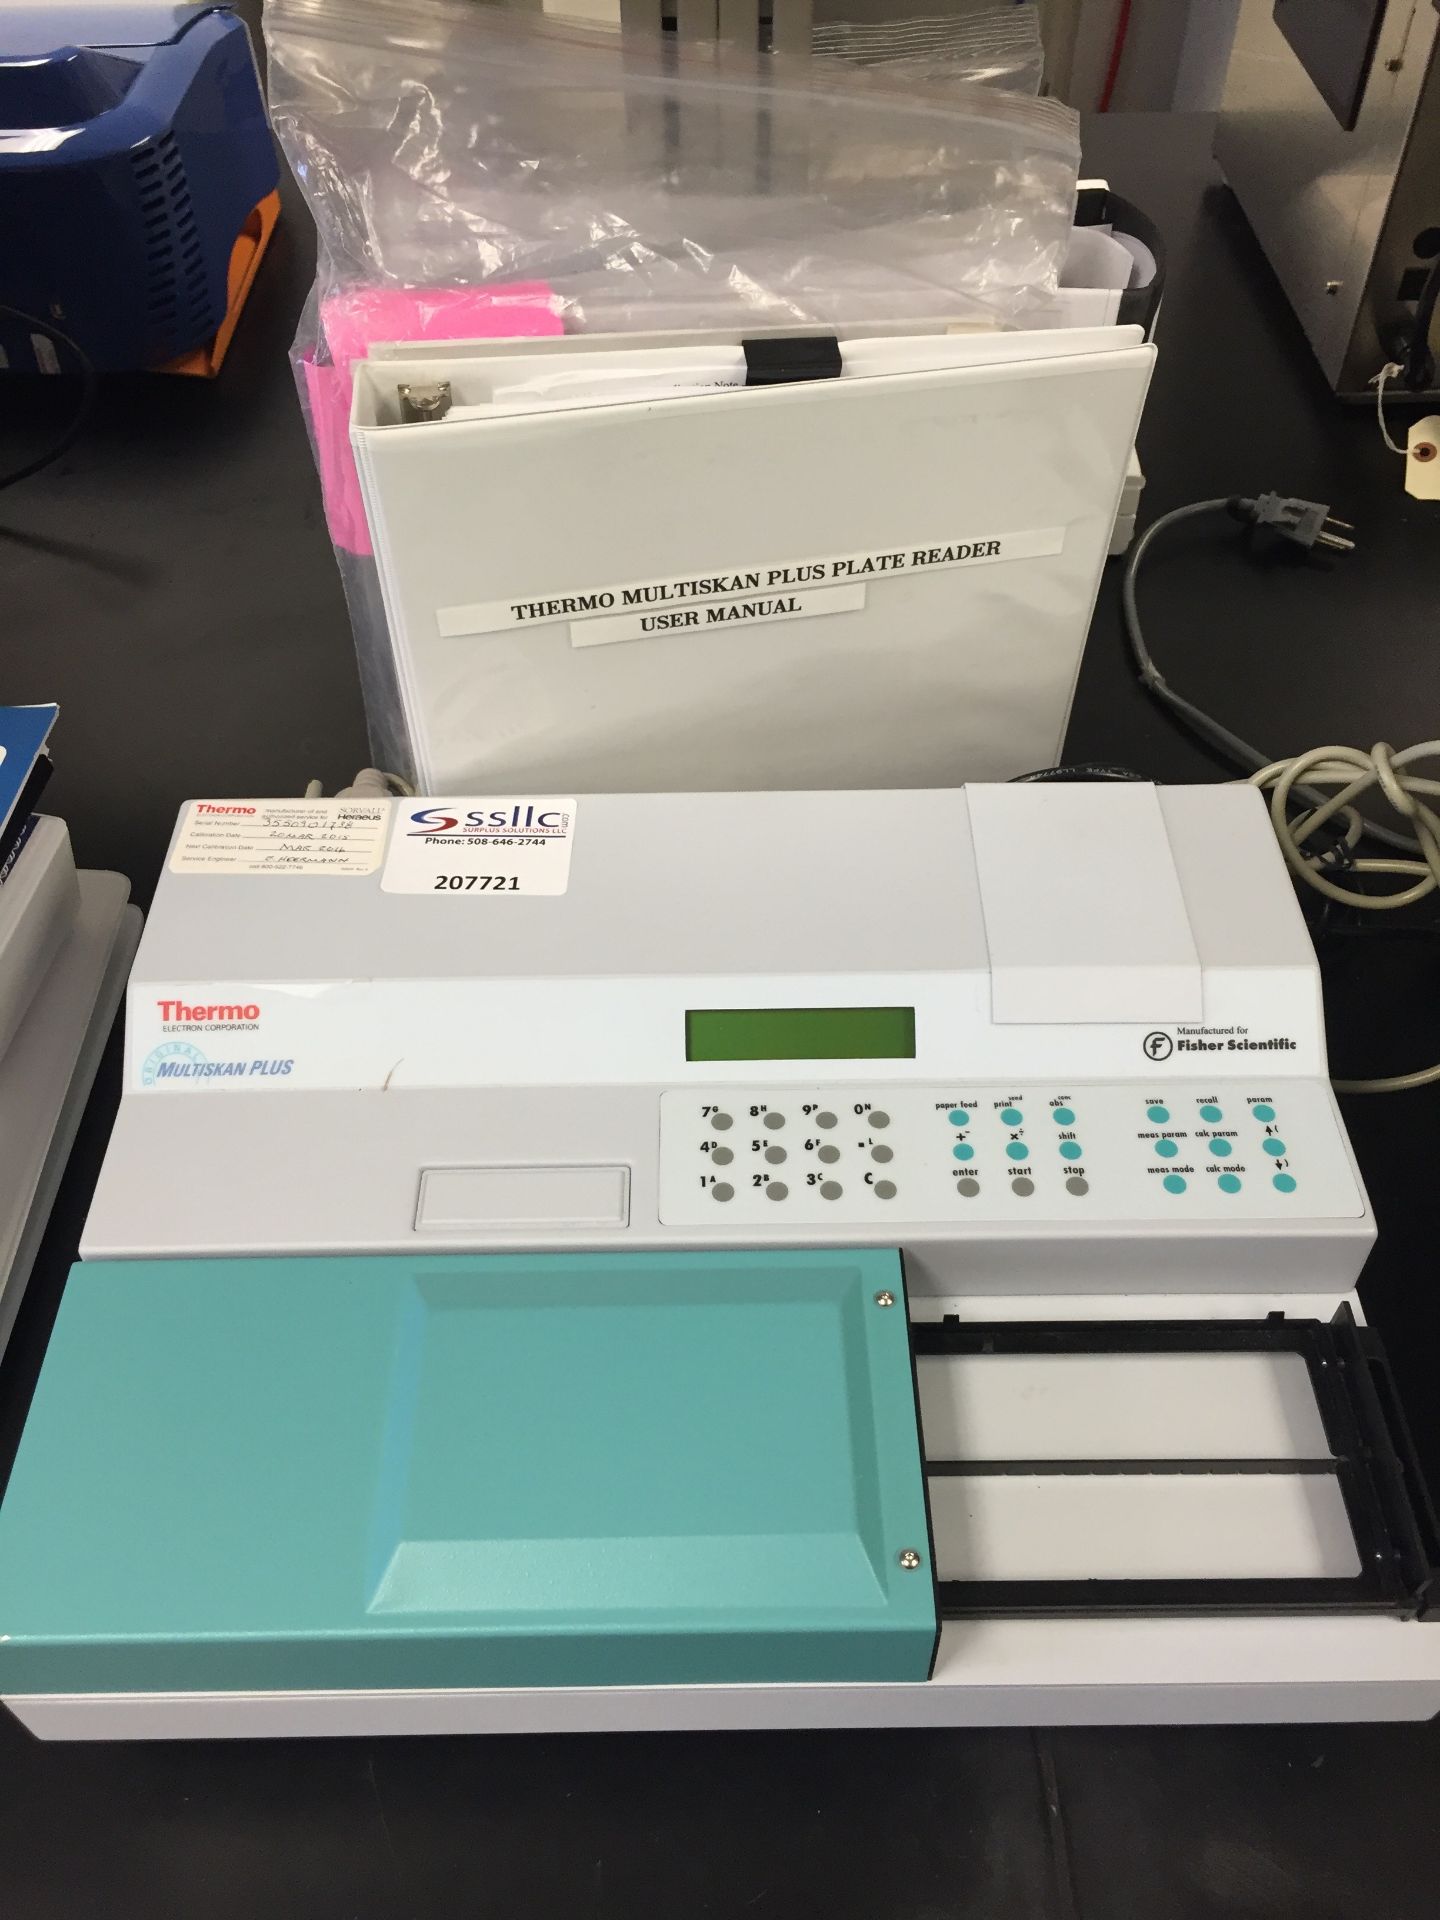 Thermo Multiskan Plus Microplate Reader